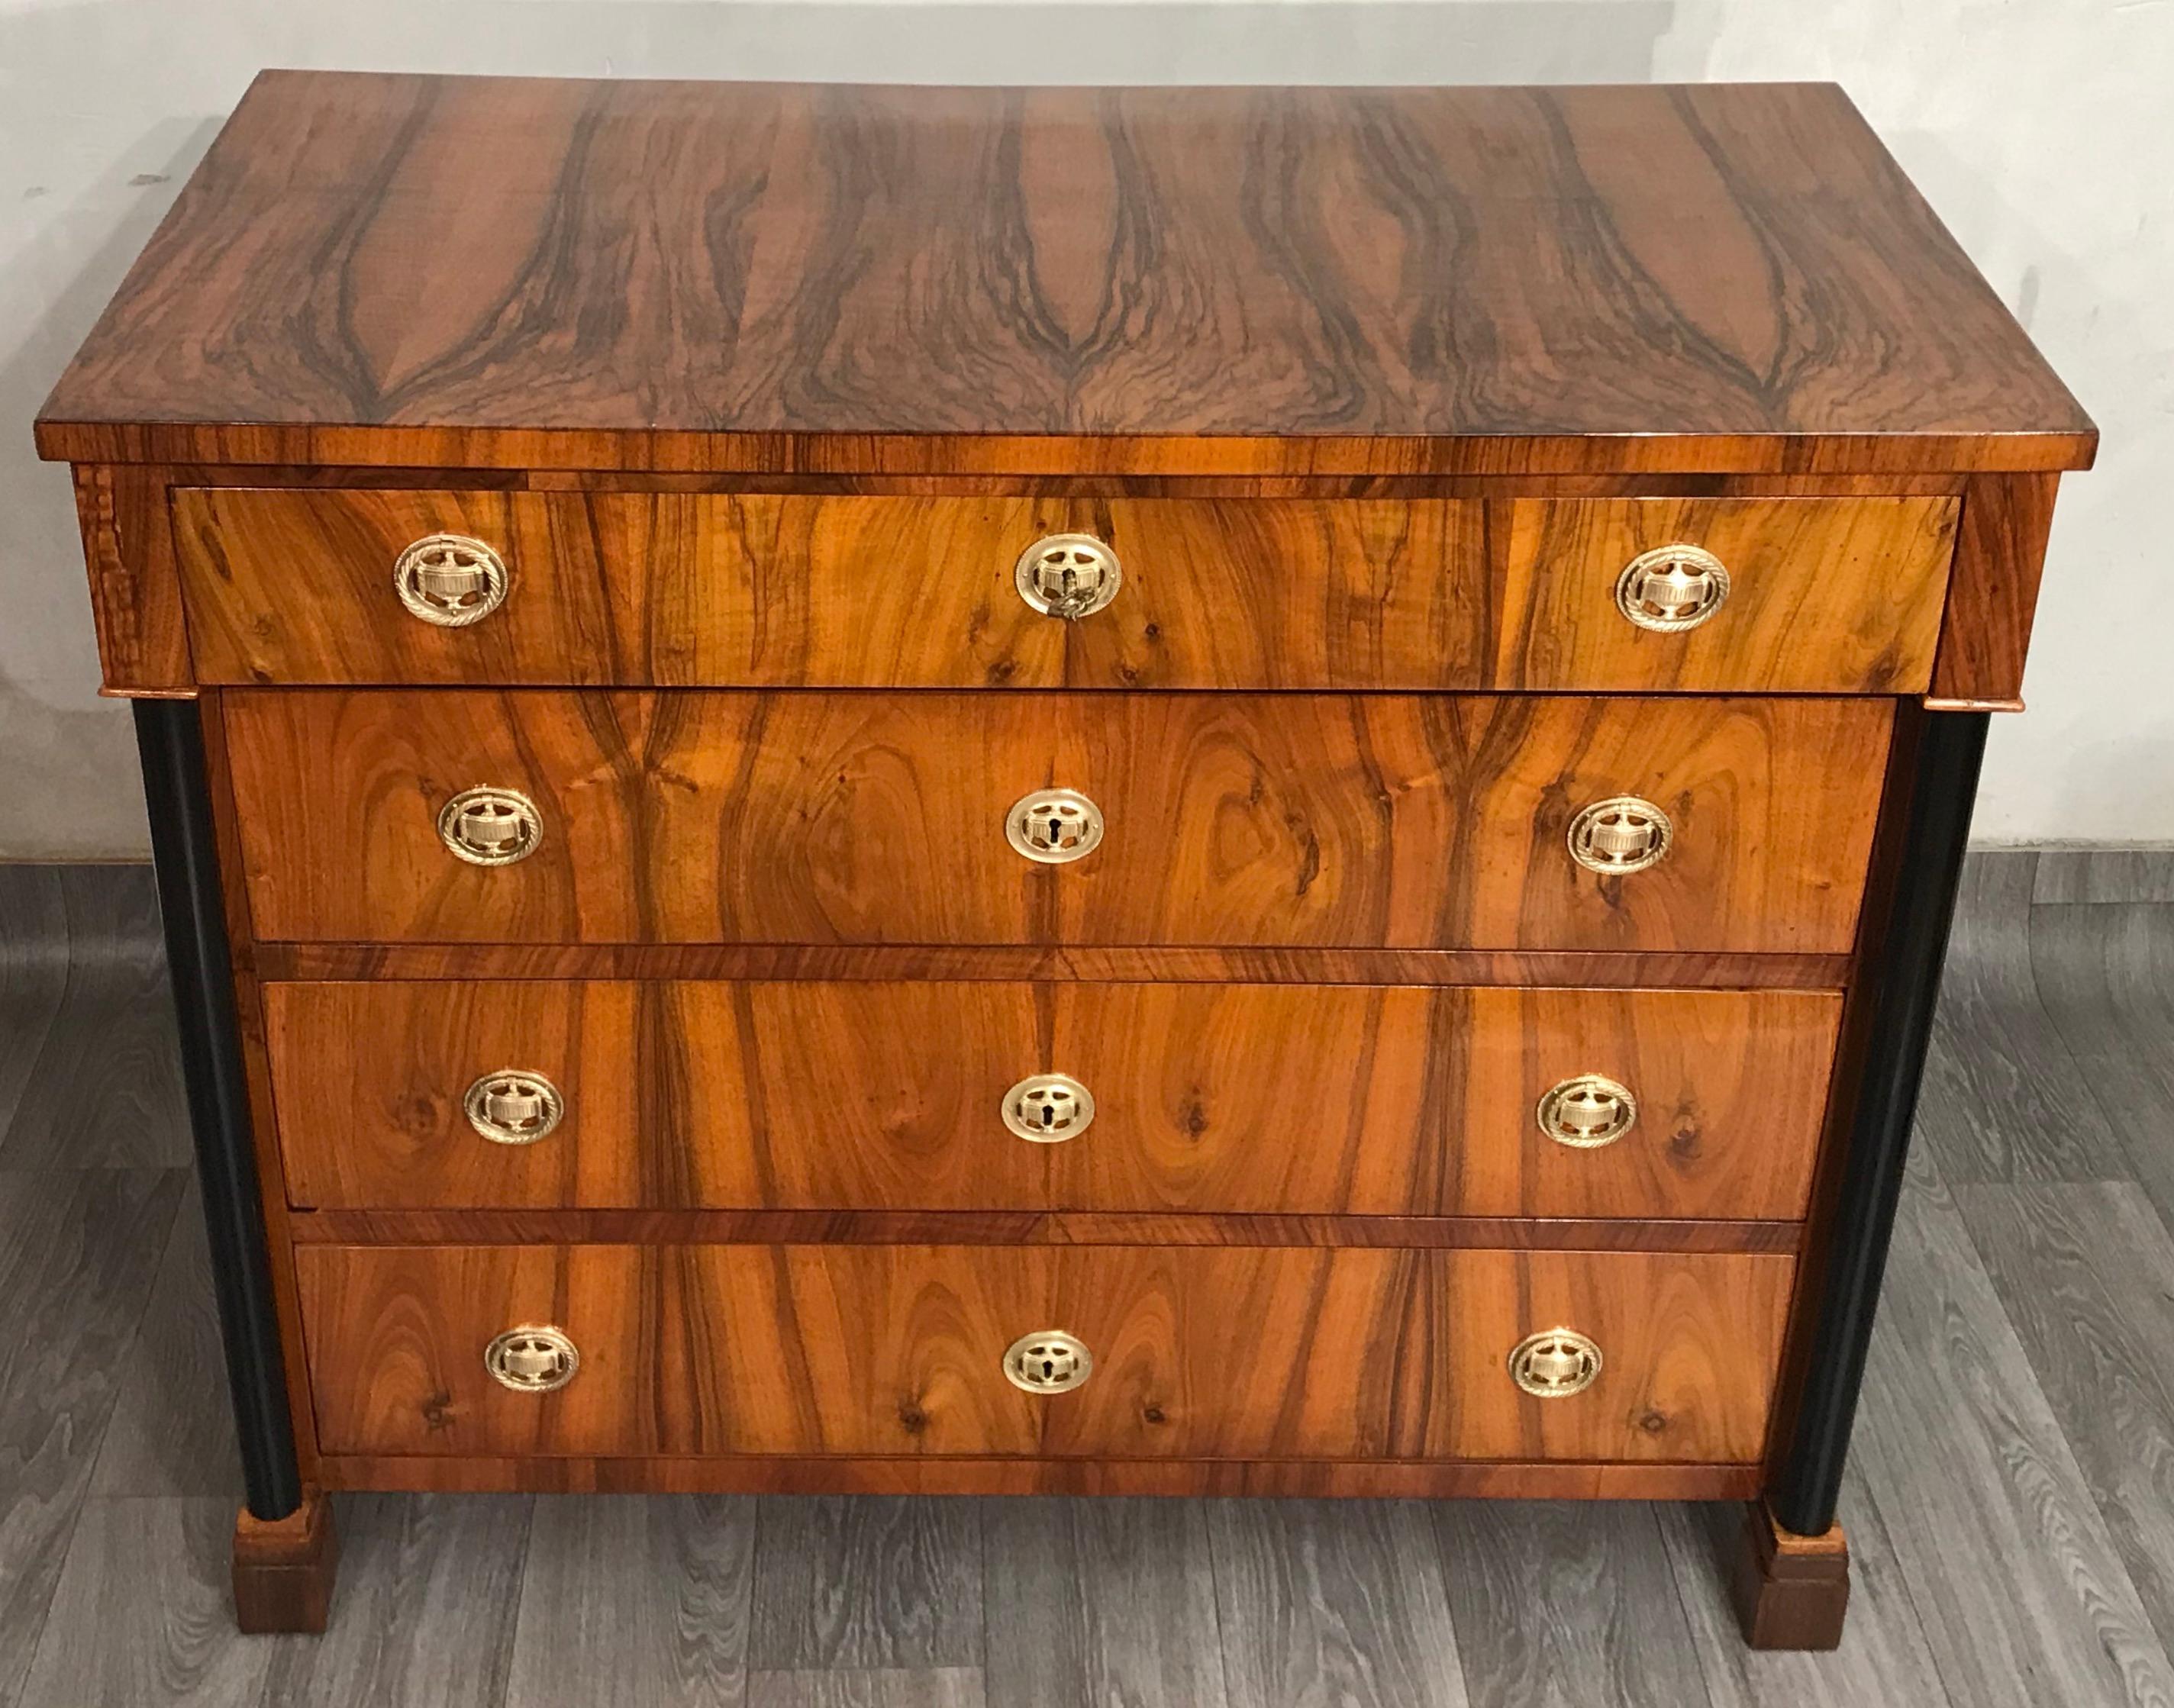 Biedermeier Dresser, South German, 1820.
This classic original four drawer Biedermeier dresser is embellished with a beautiful walnut veneer. The ebonized columns add a modern touch to this pretty chest of drawers. The dresser comes refinished and